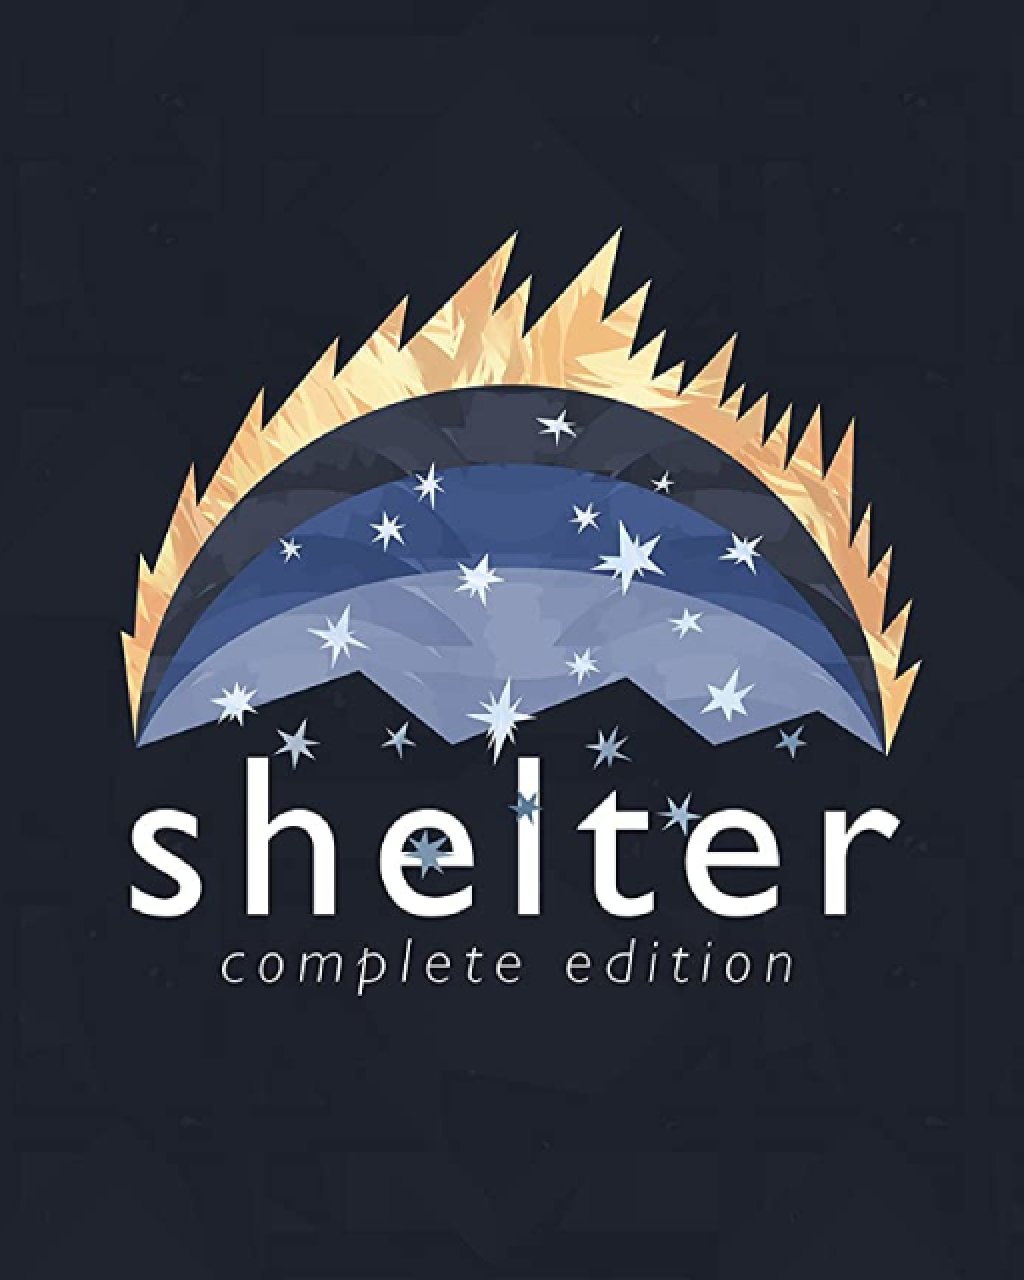 Shelter Complete Edition